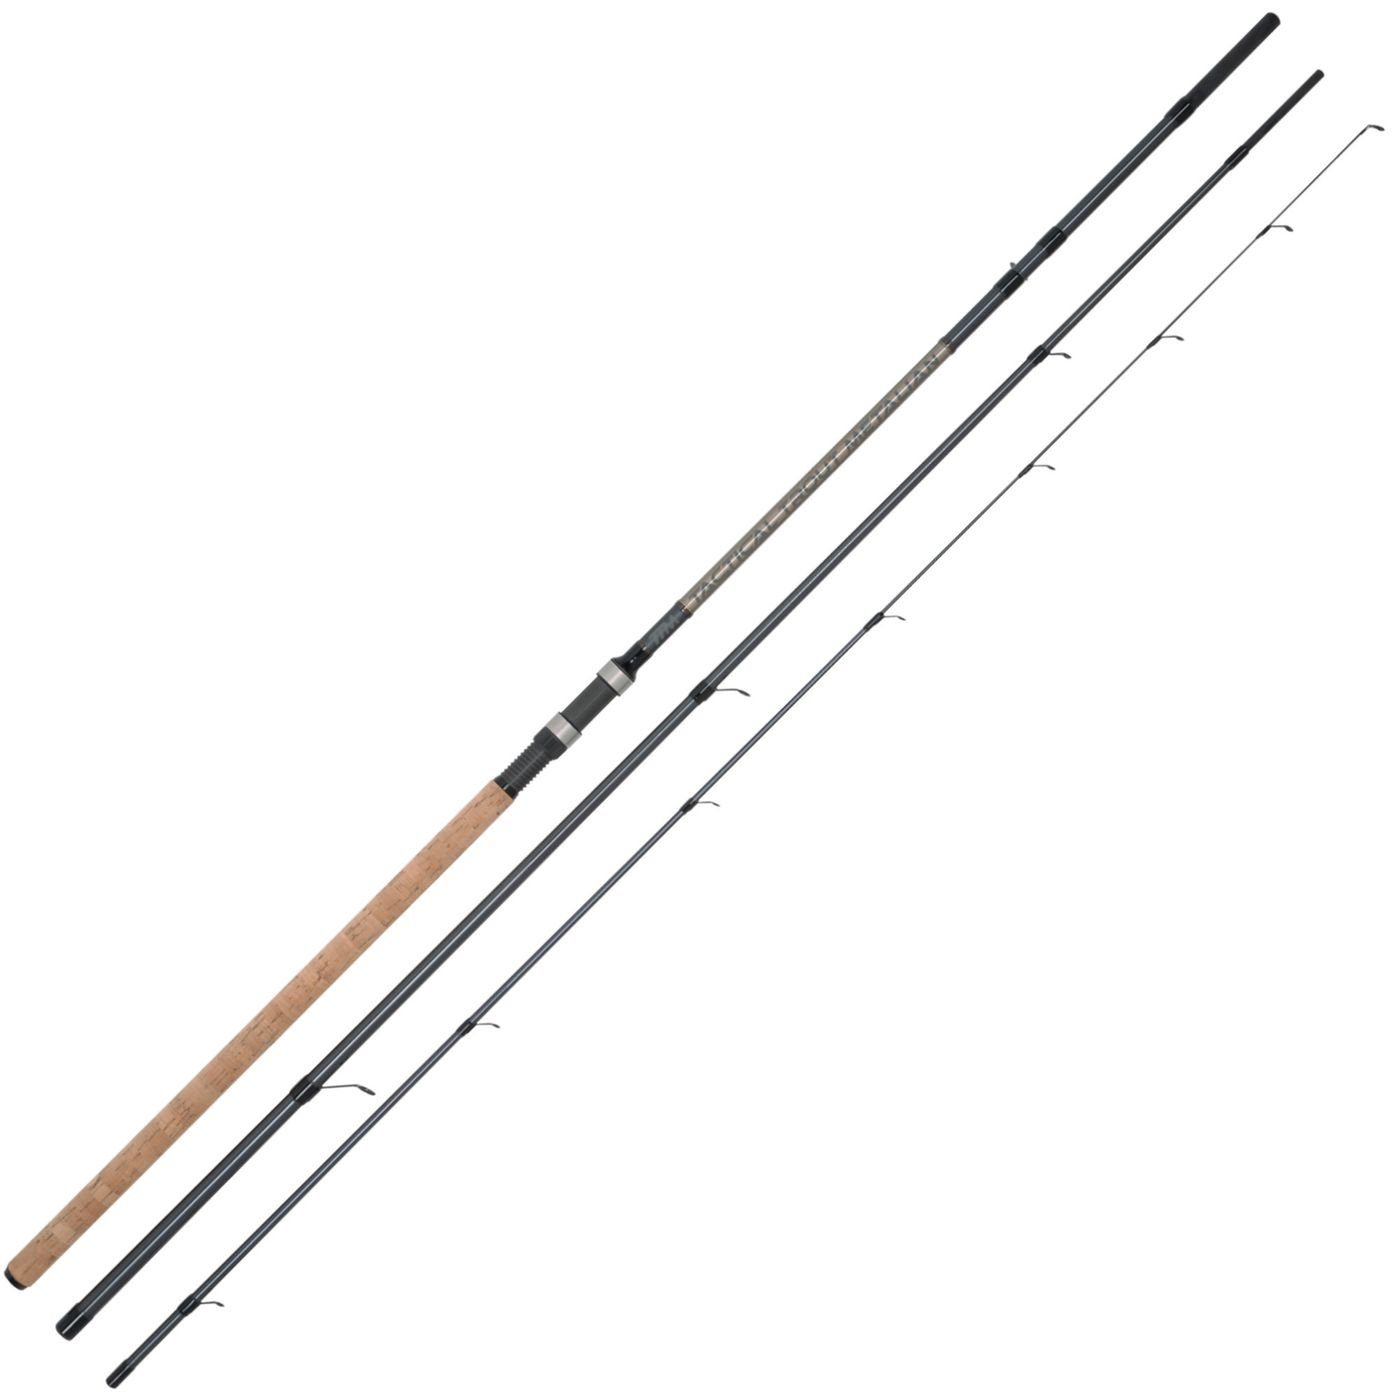 SPRO Forellenrute Spro Trout Master Tactical Trout Metalian 3,60m 5-40g